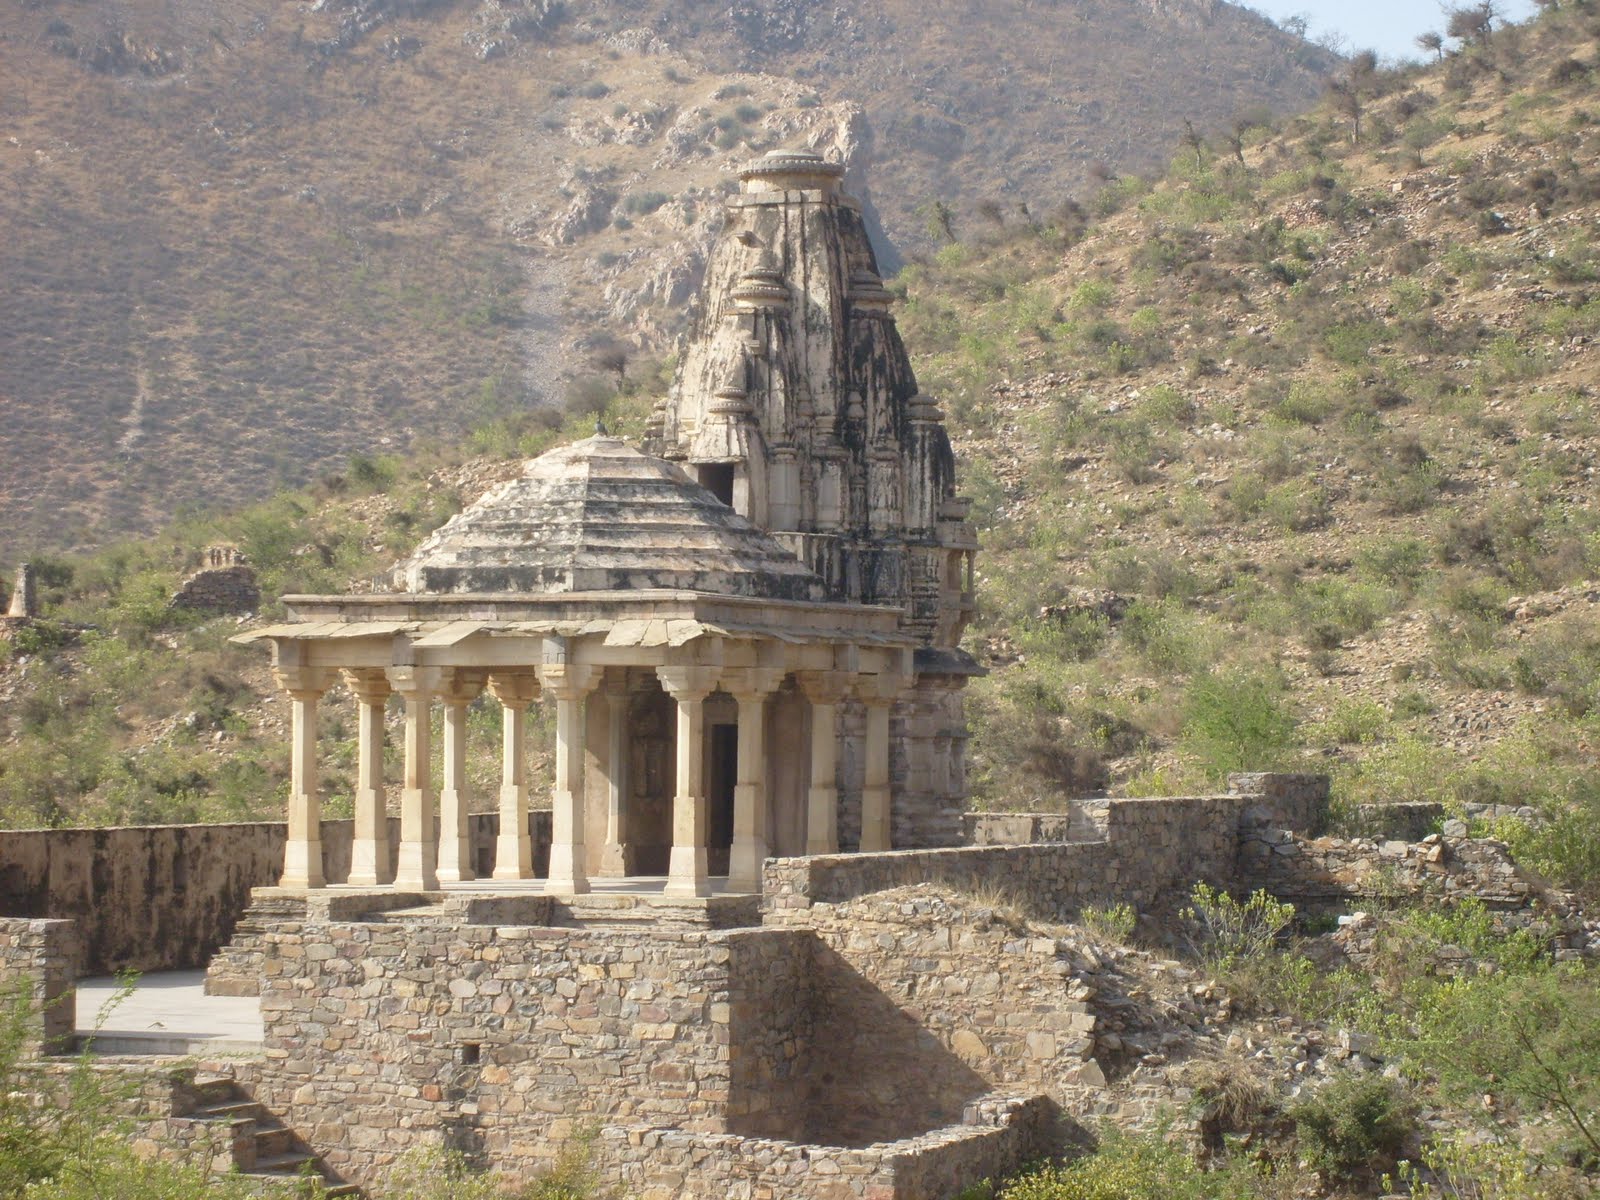 Jaipur City Daily: Bhangarh Rajasthan-Haunted Place Temple.